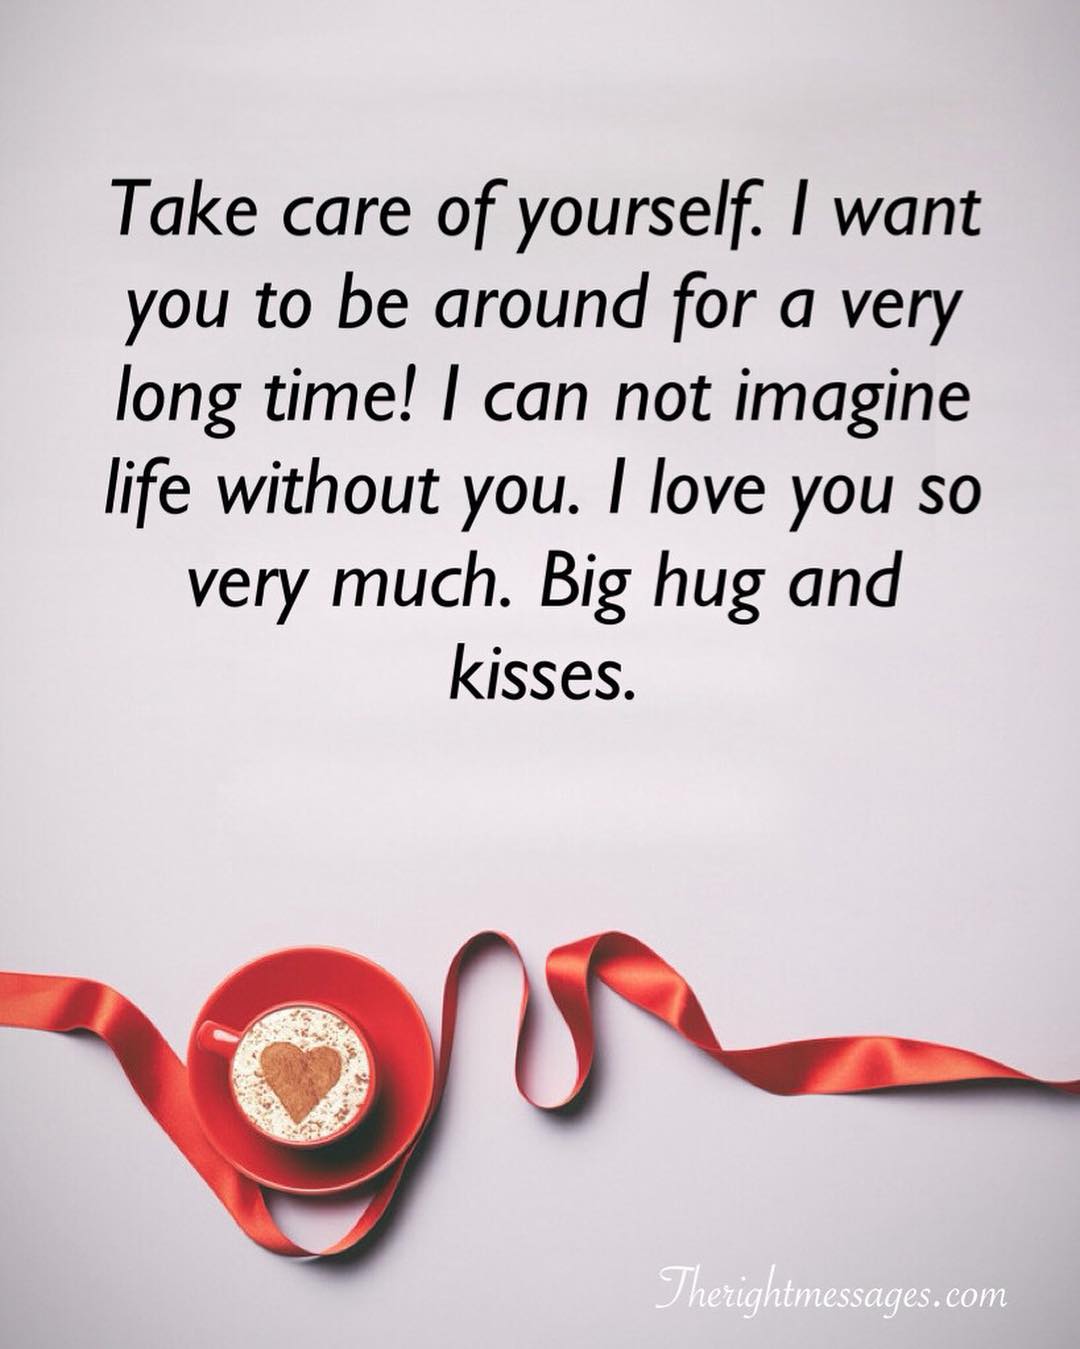 Romantic Take Care Messages for Him